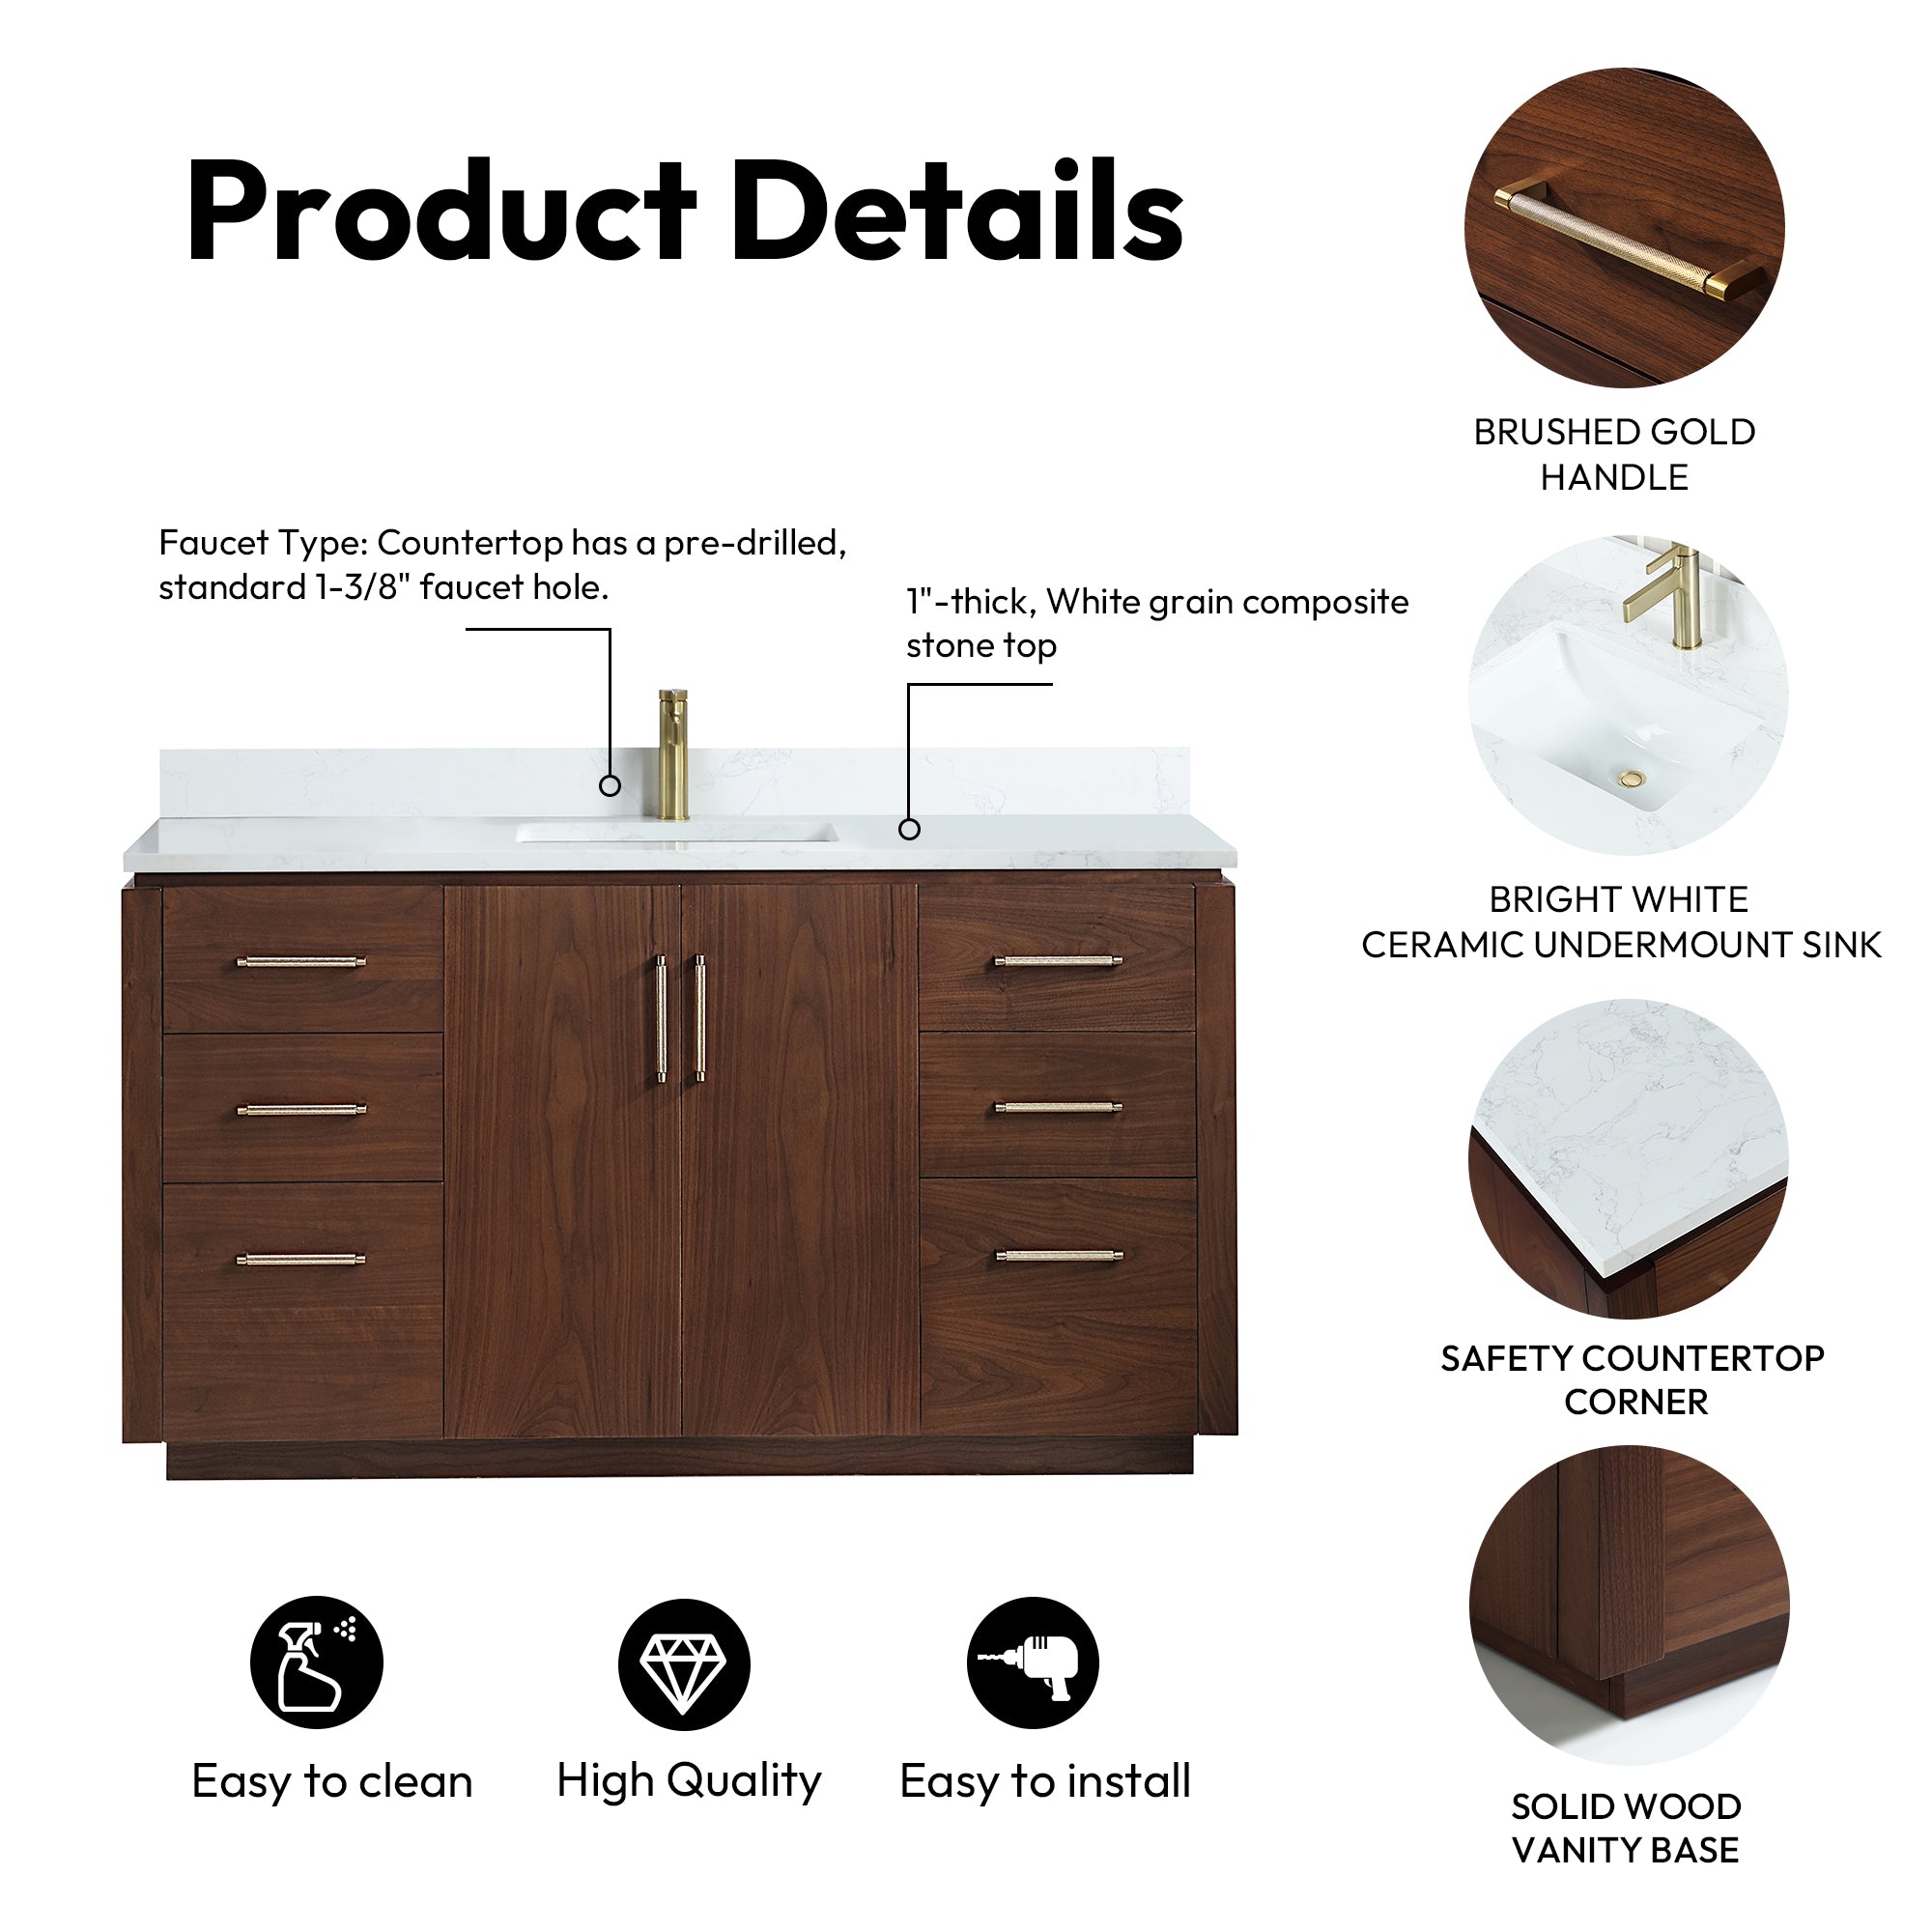 San 60" Free-standing Single Bath Vanity in Natural Walnut with White Grain Composite Stone Top